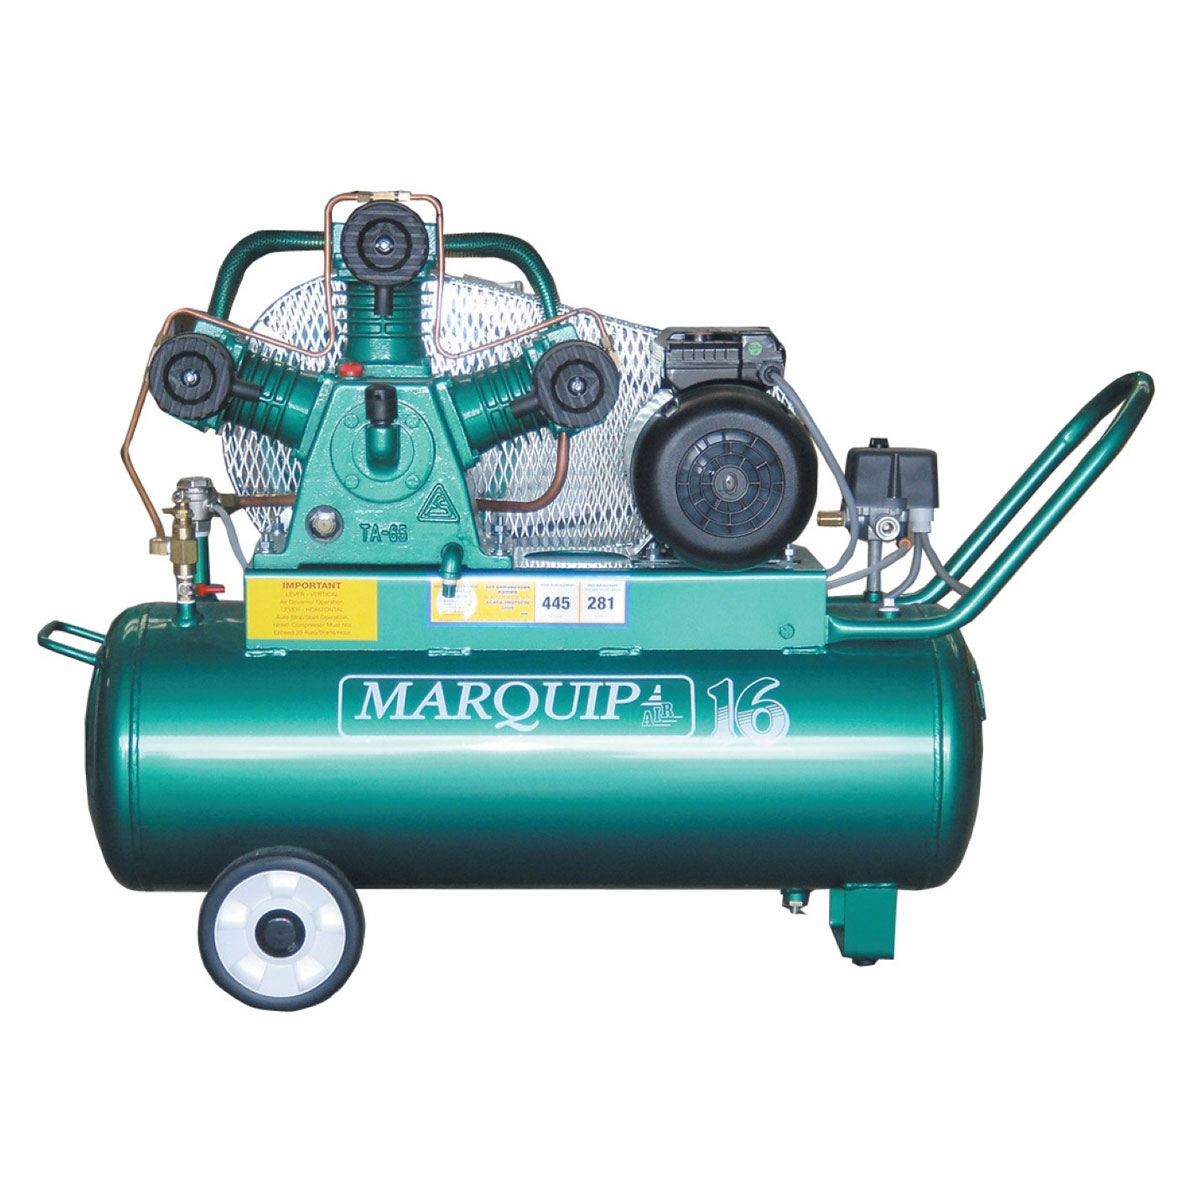 Marquip Compressor 16 2kW with Filter/Reg and QD Coupler